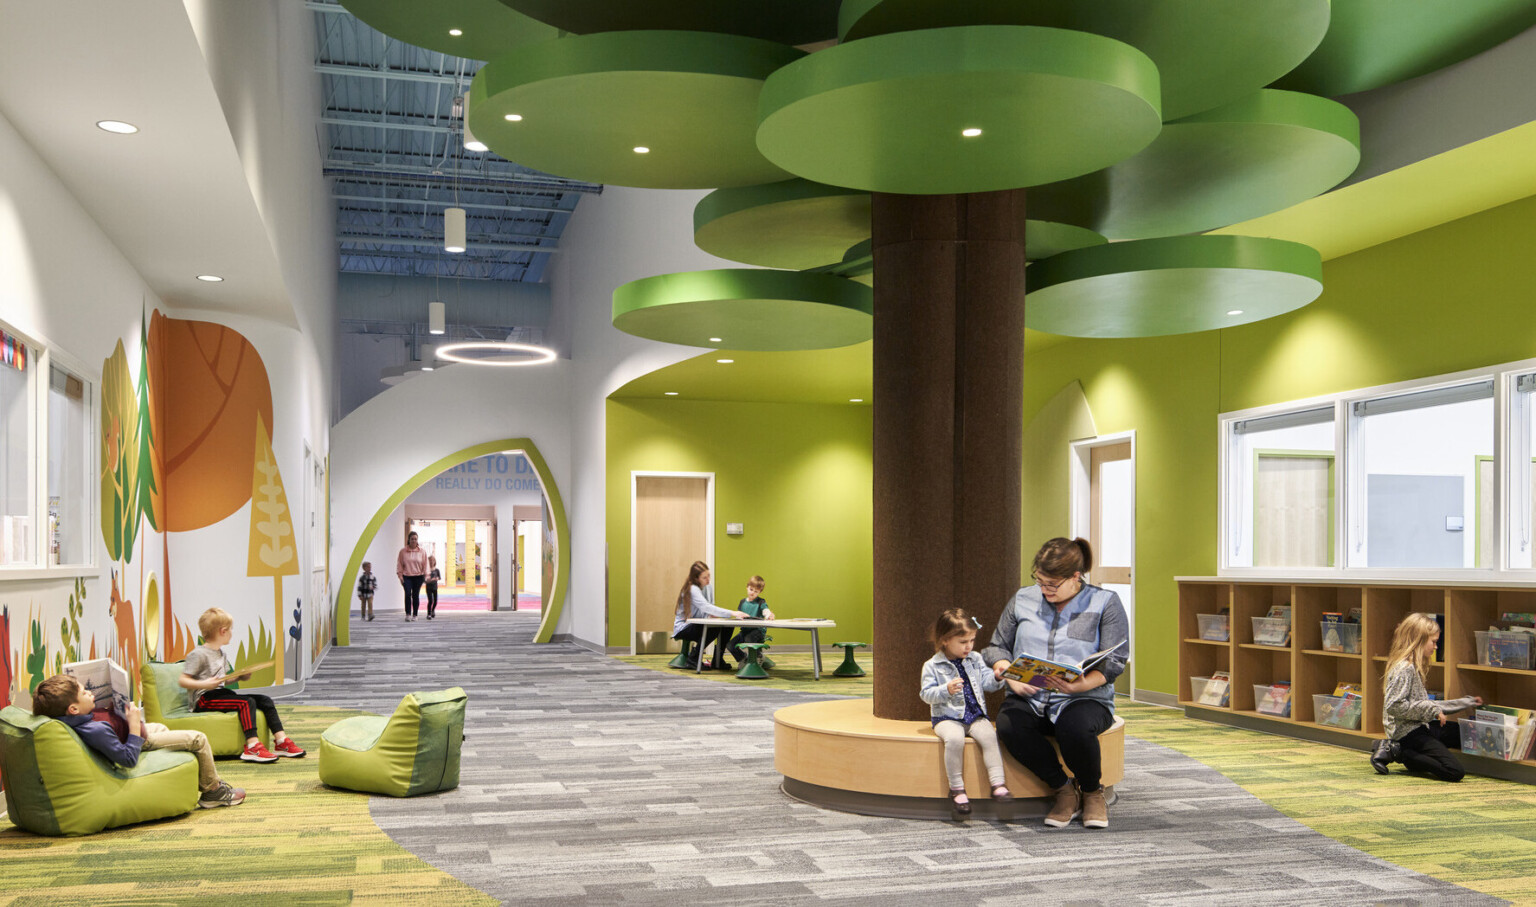 people reading on a brown circular bench with a brown column and green ceiling fixtures in hallway lined with forest graphics